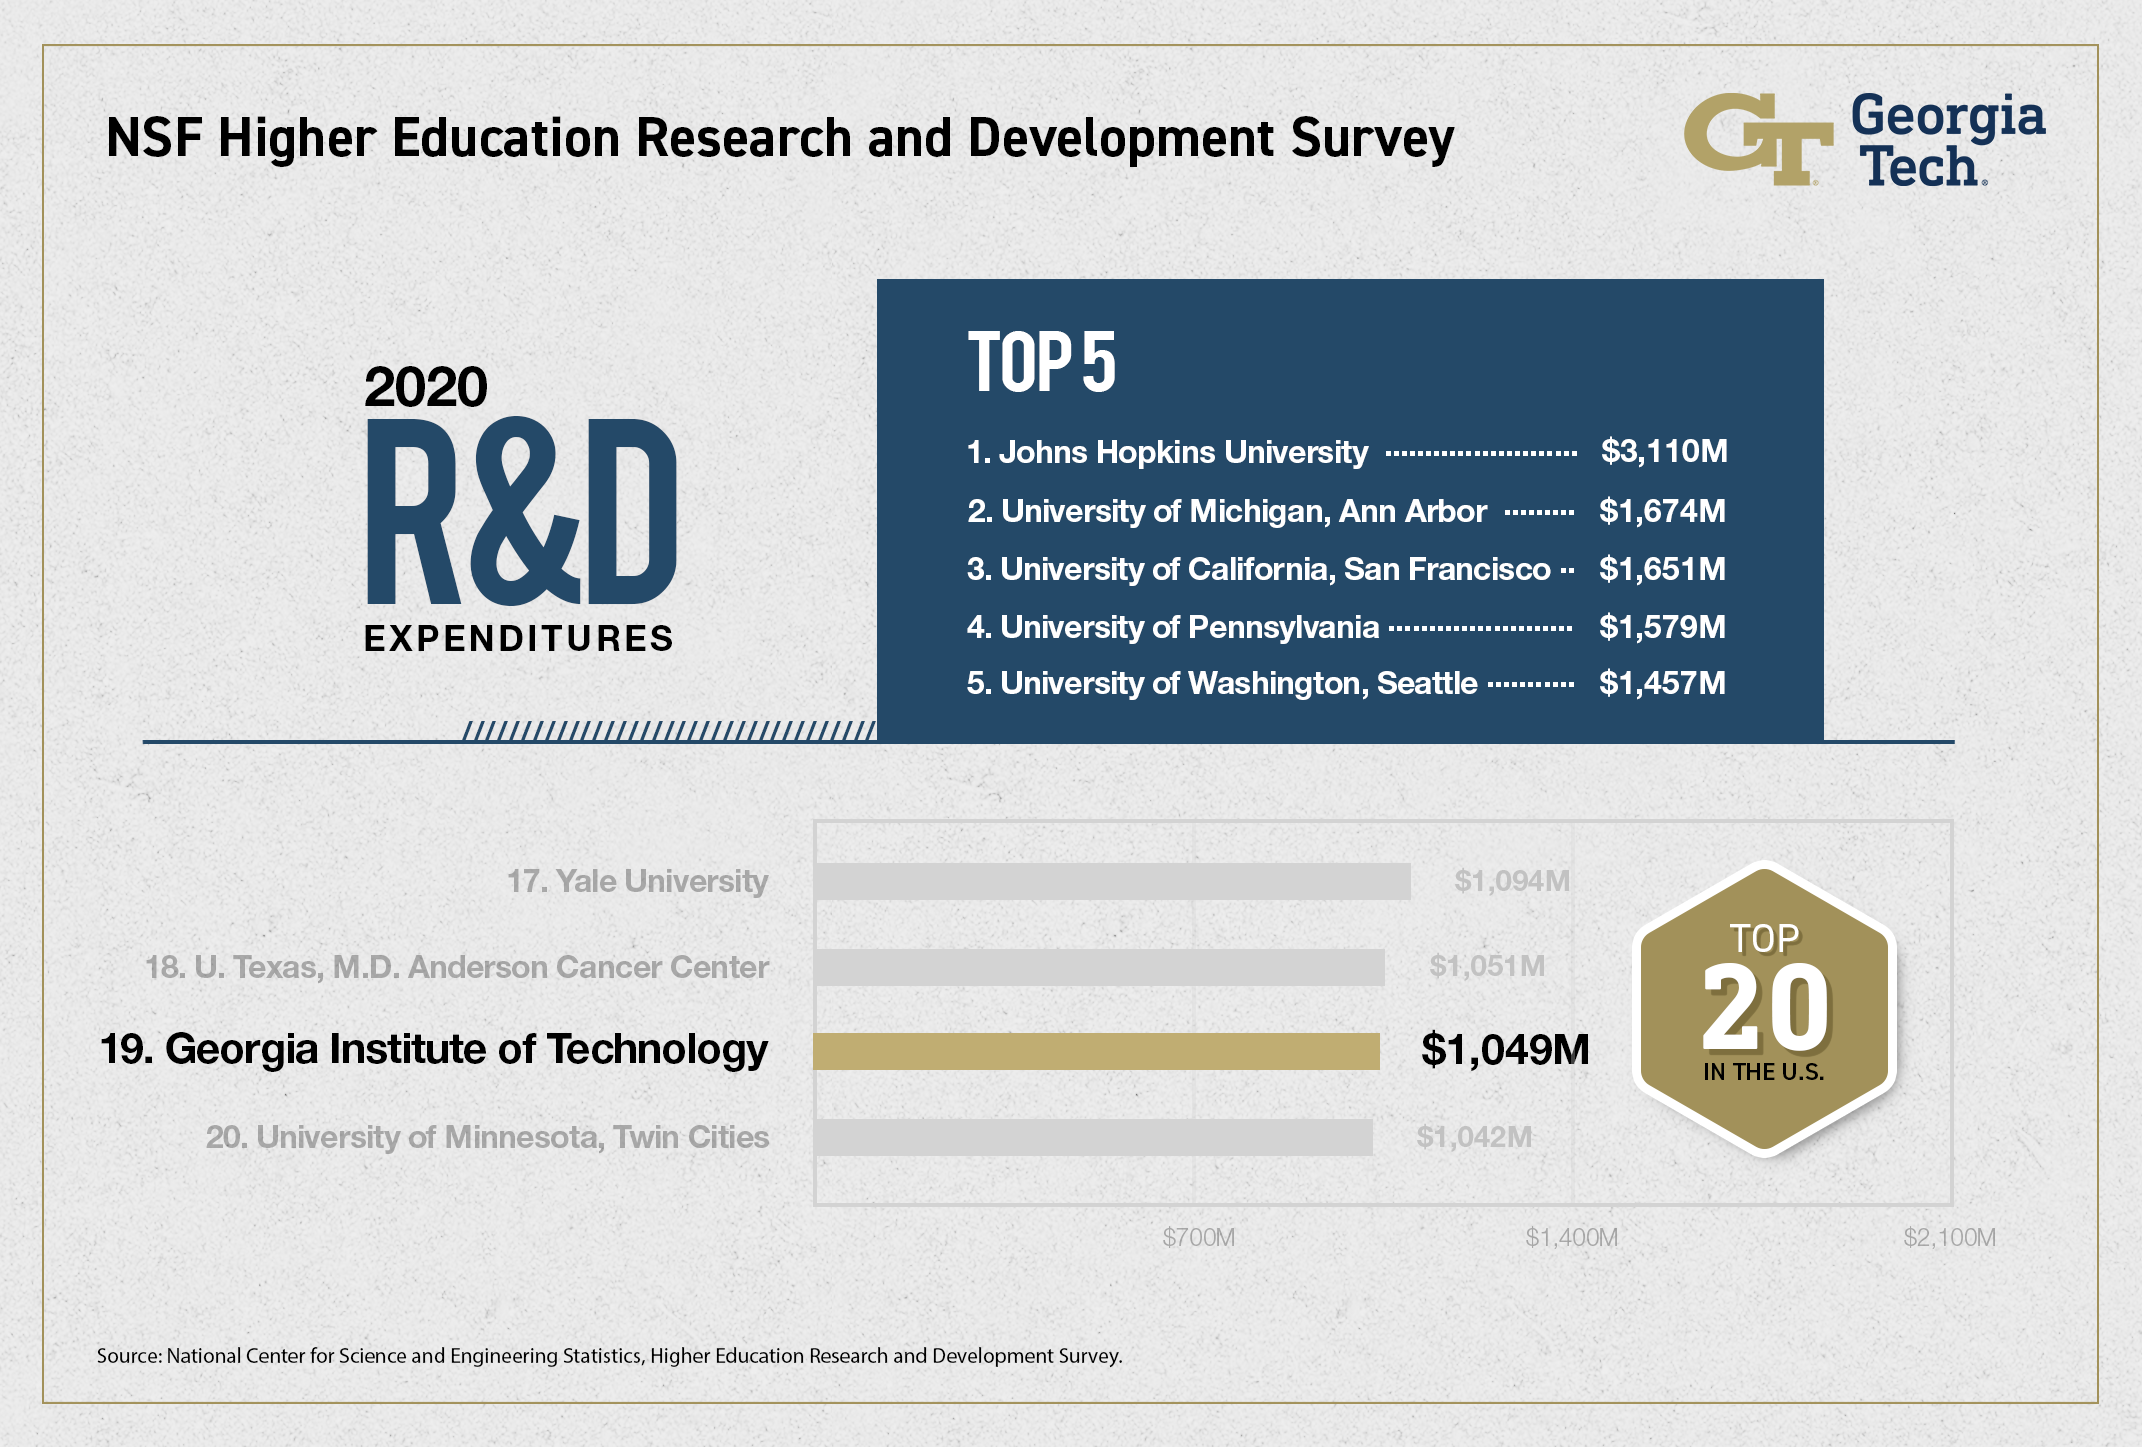 Top US Universities for Research and Development Expenses for the Fiscal Year 2020